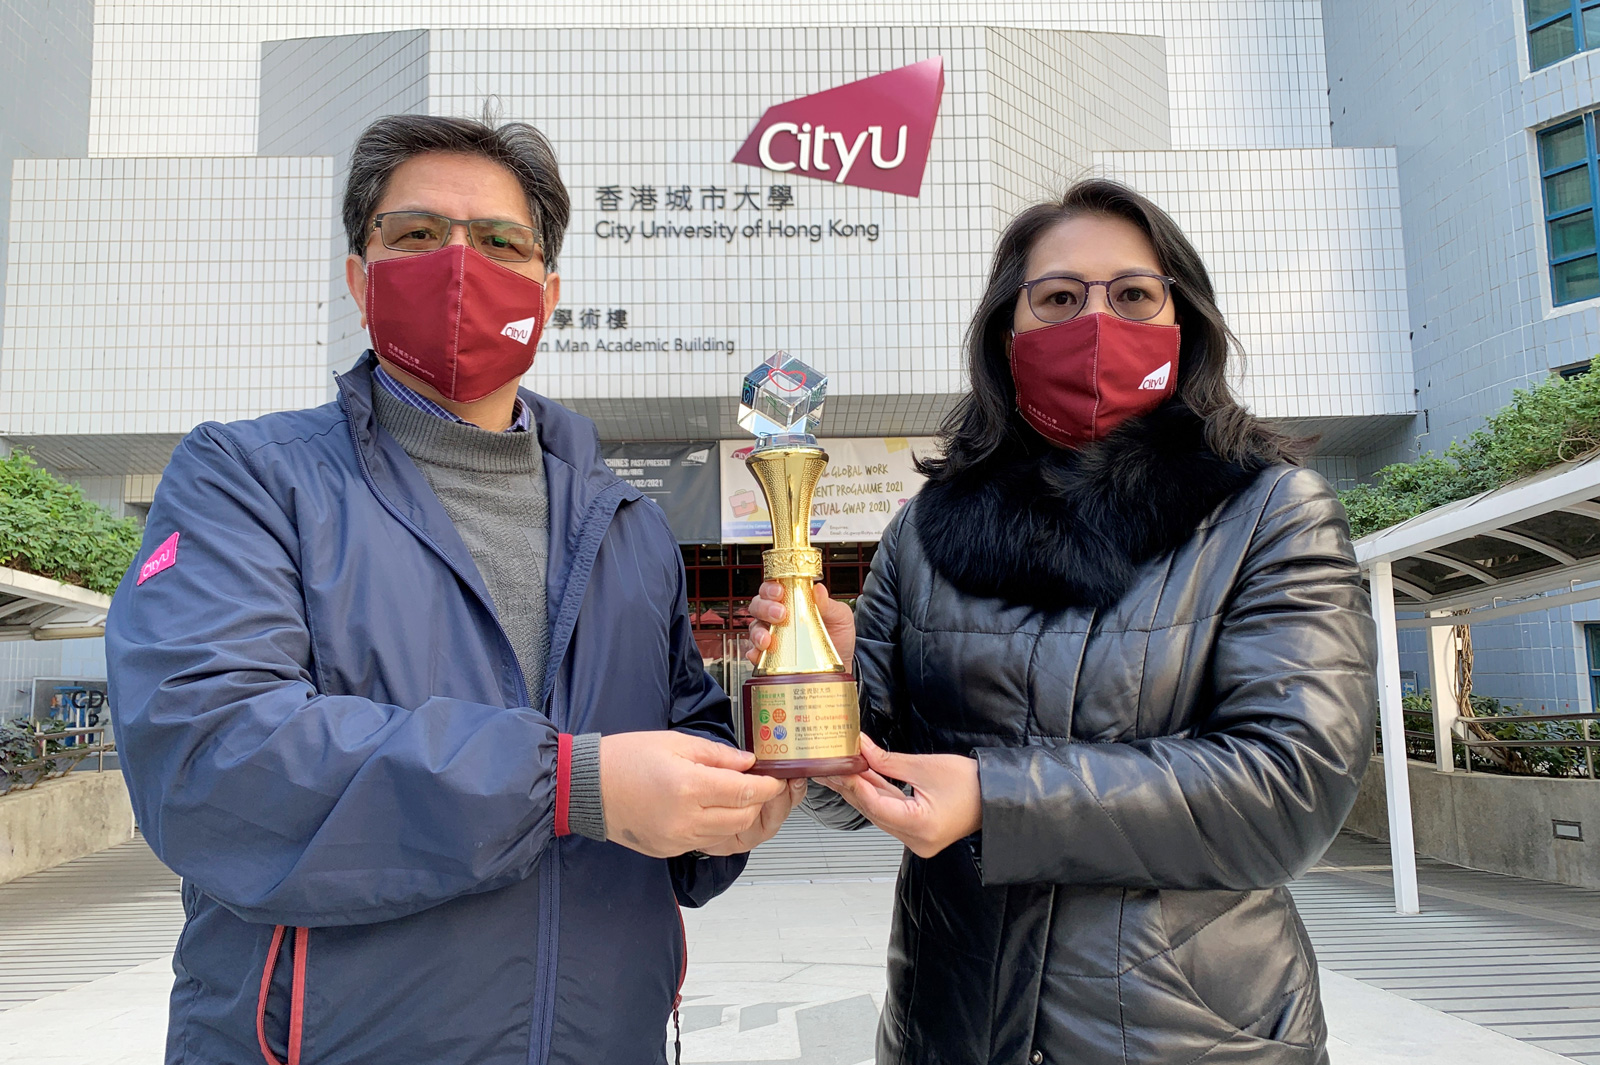 Ms Brenda Lai Fung-ming (right), Director of Facilities Management, and Mr Leung Wai-keung, Senior Safety and Administration Manager, received the award on behalf of CityU.